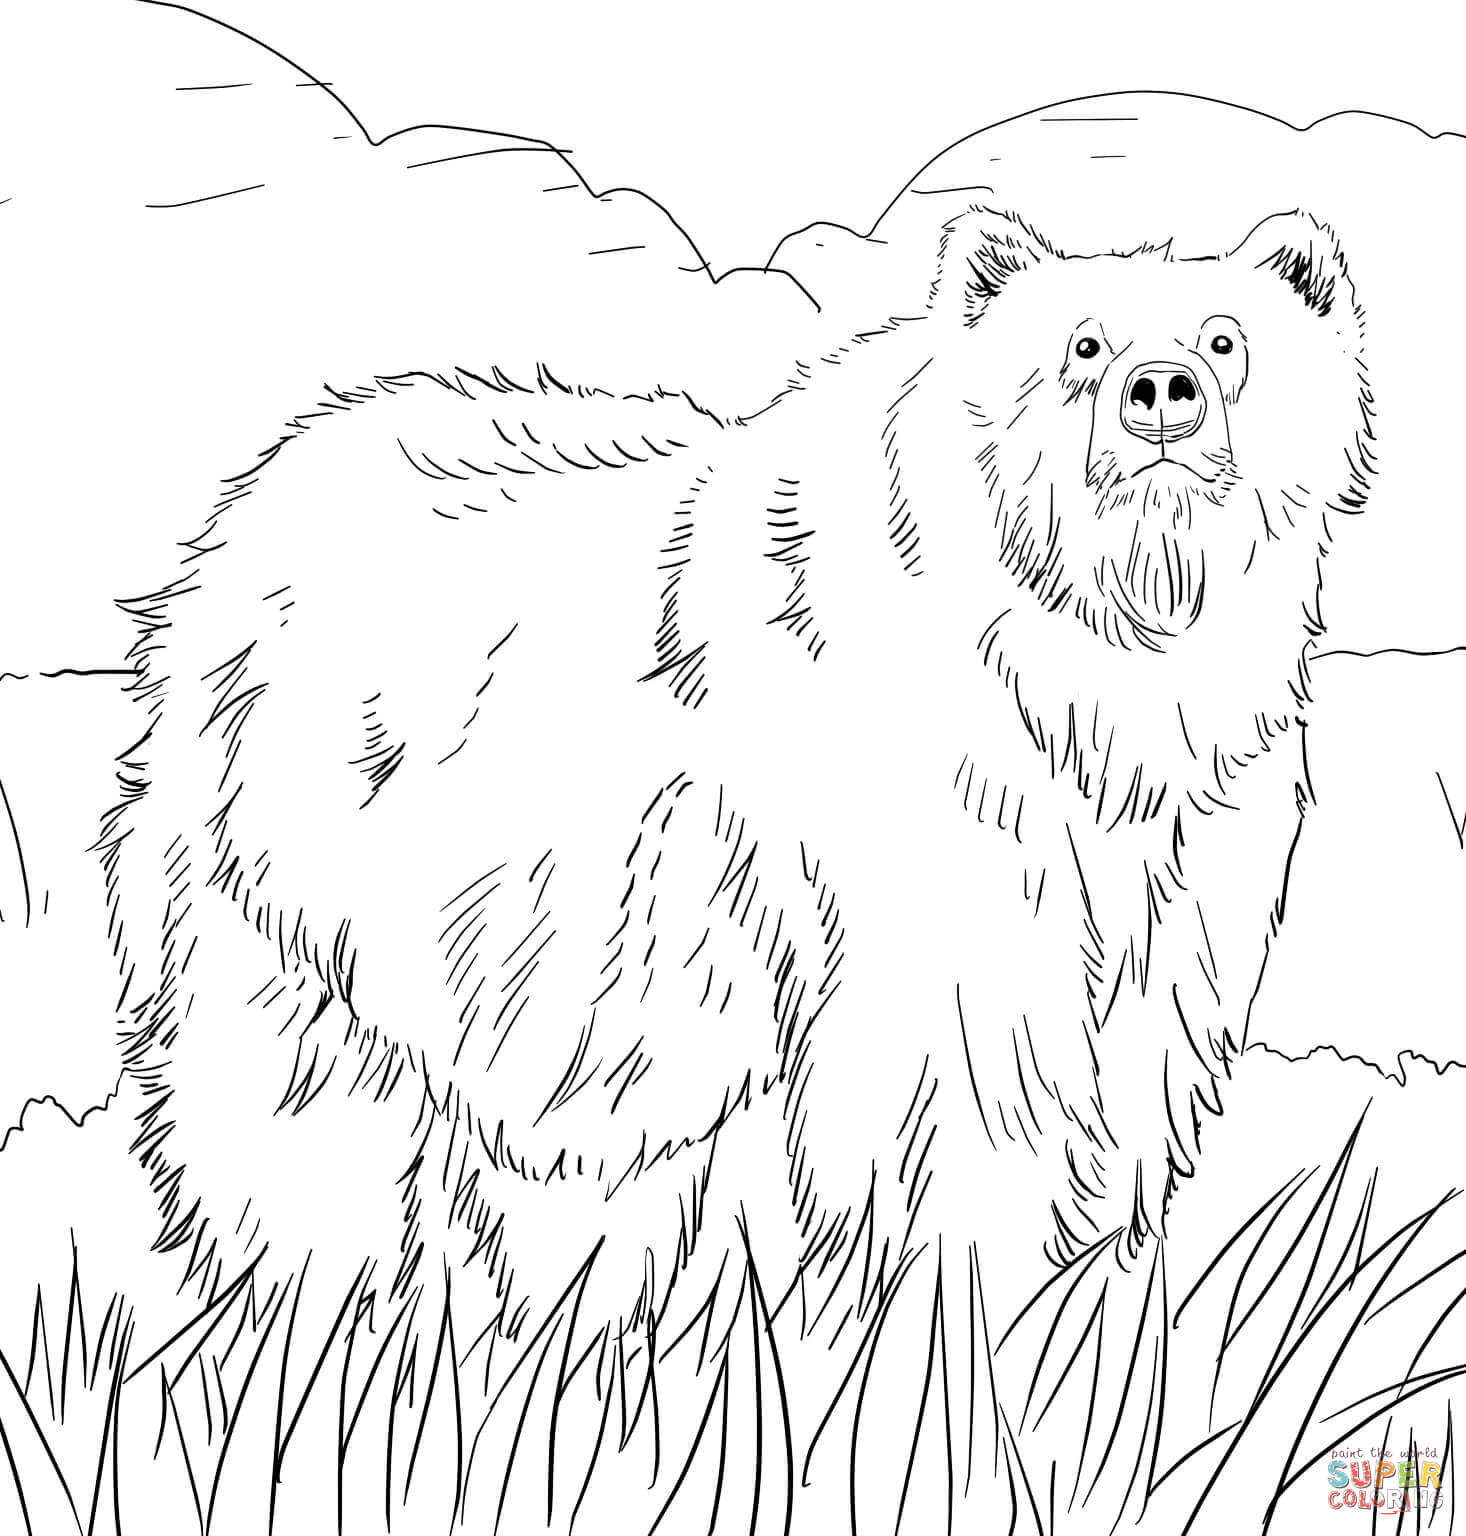 Bears Coloring Pages Grizzly Bears Coloring Pages Free Coloring Pages